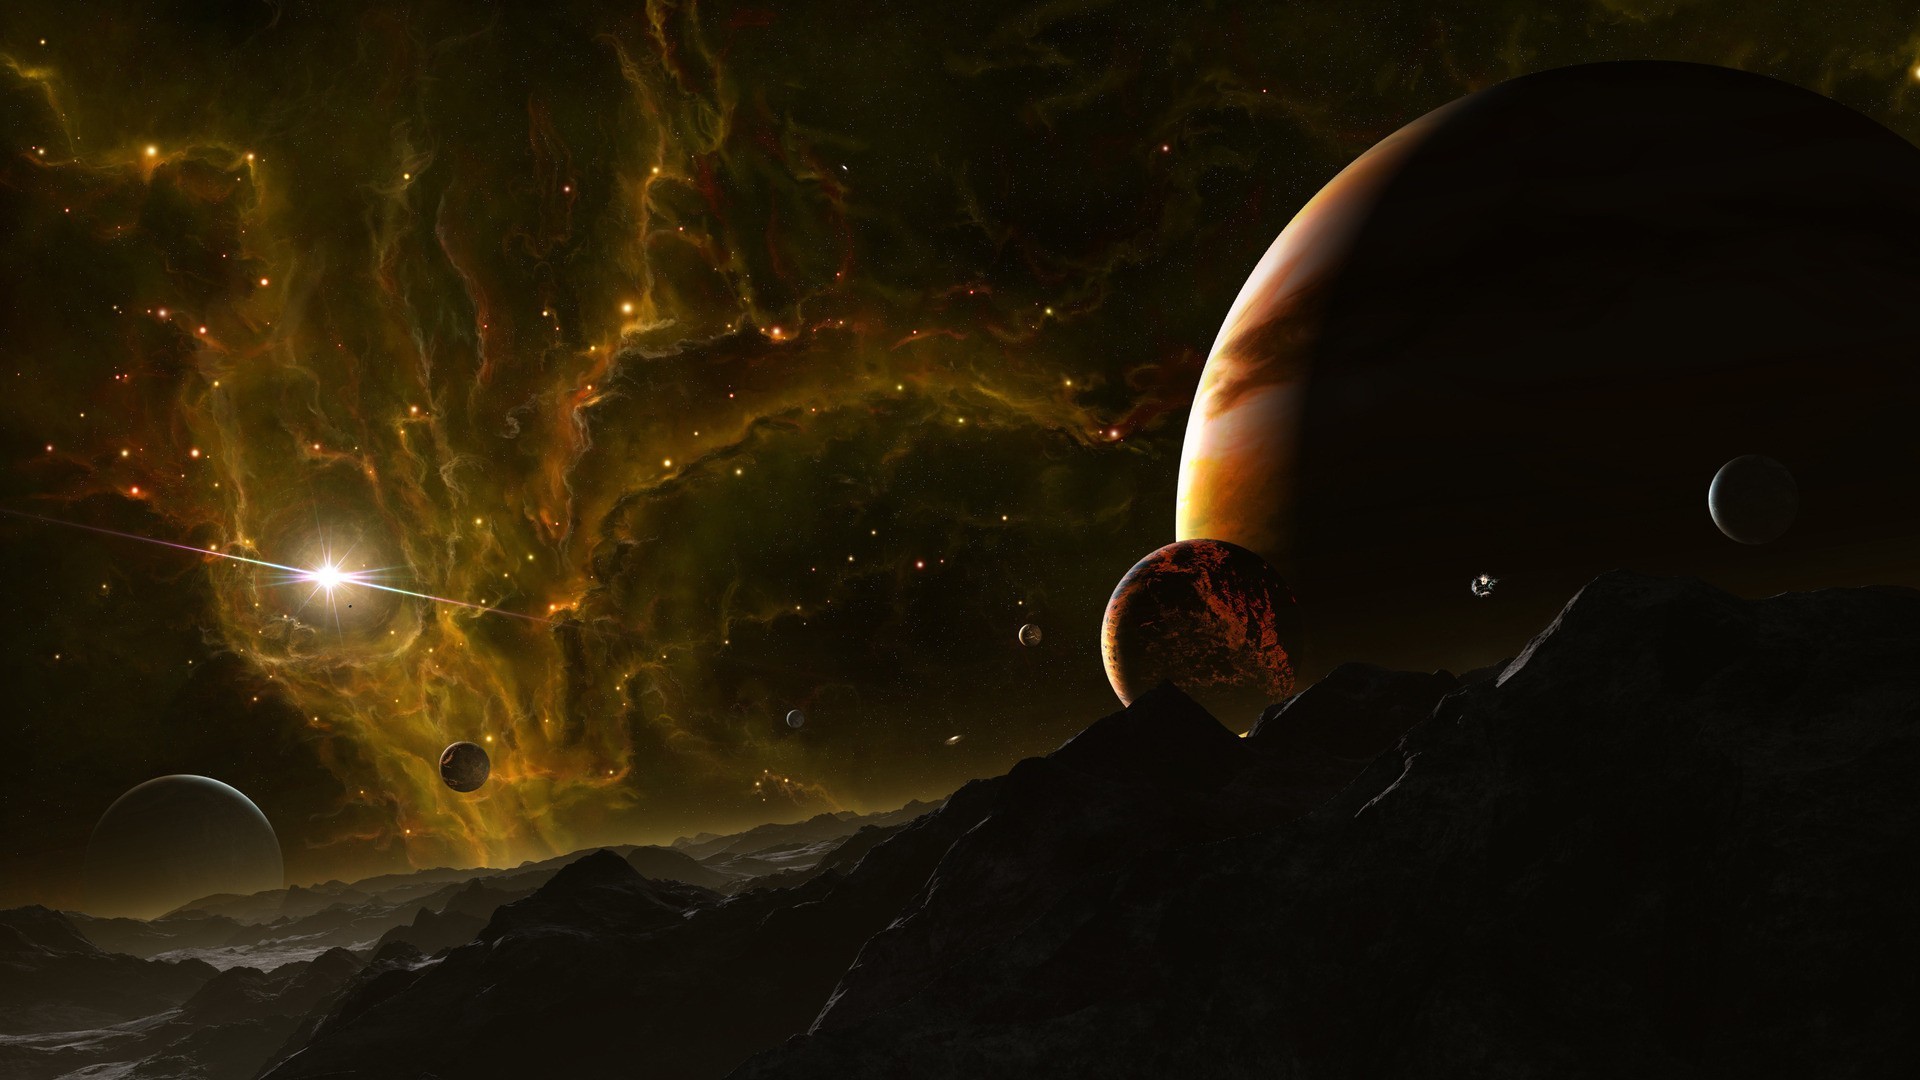 1920x1080 Outer Space Planets Digital Art Wallpaper At 3d Wallpapers